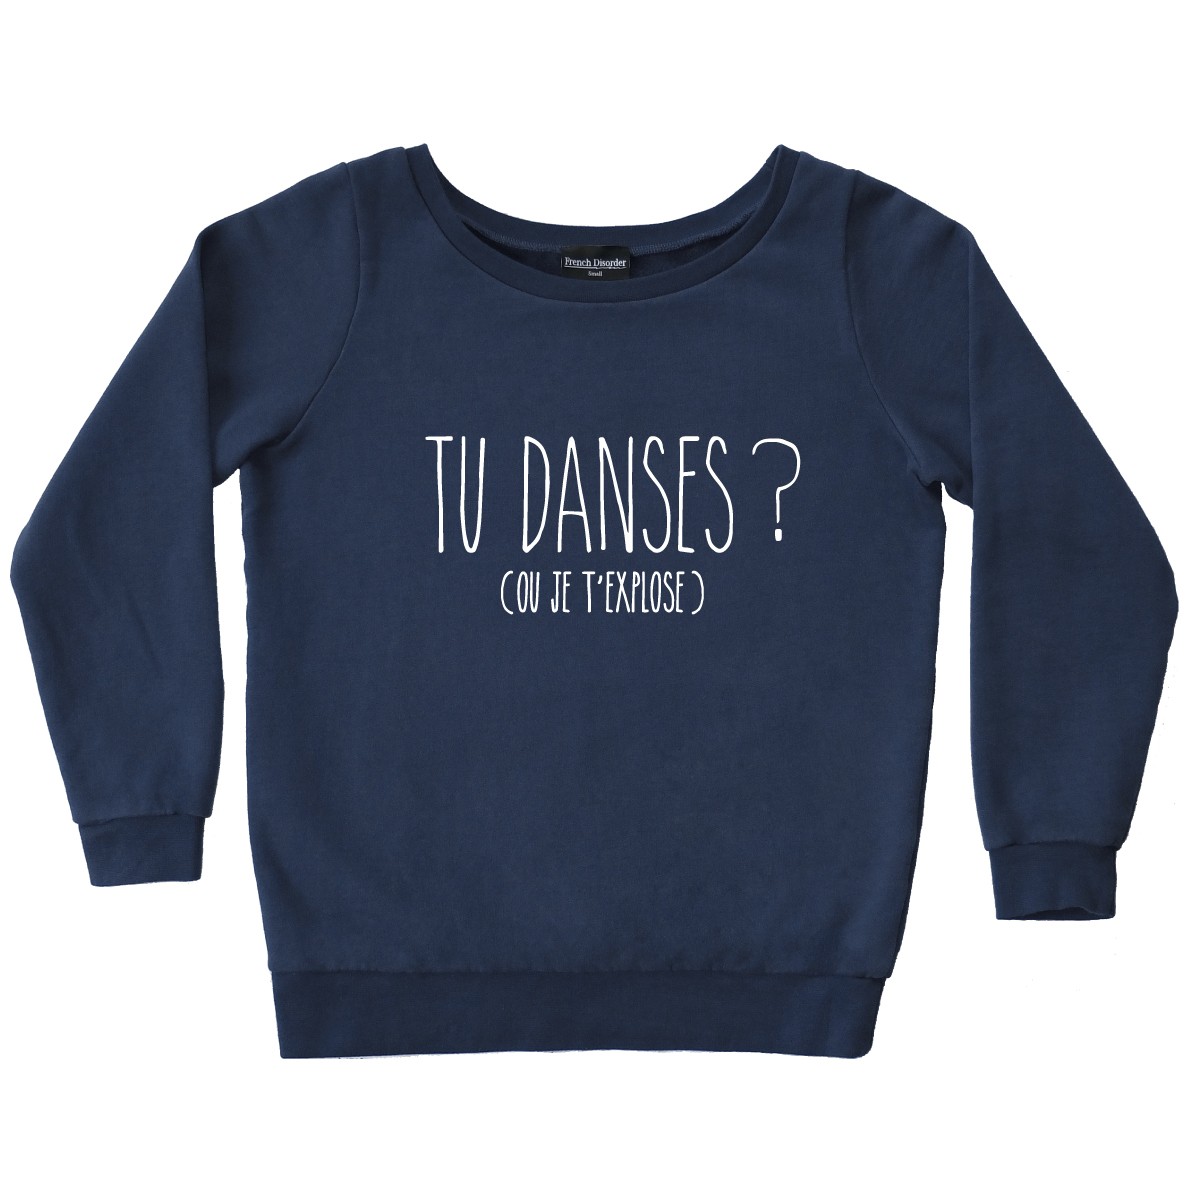 M Youdesign FR Sweat-Shirt Jacques Chirac french touch ref 818